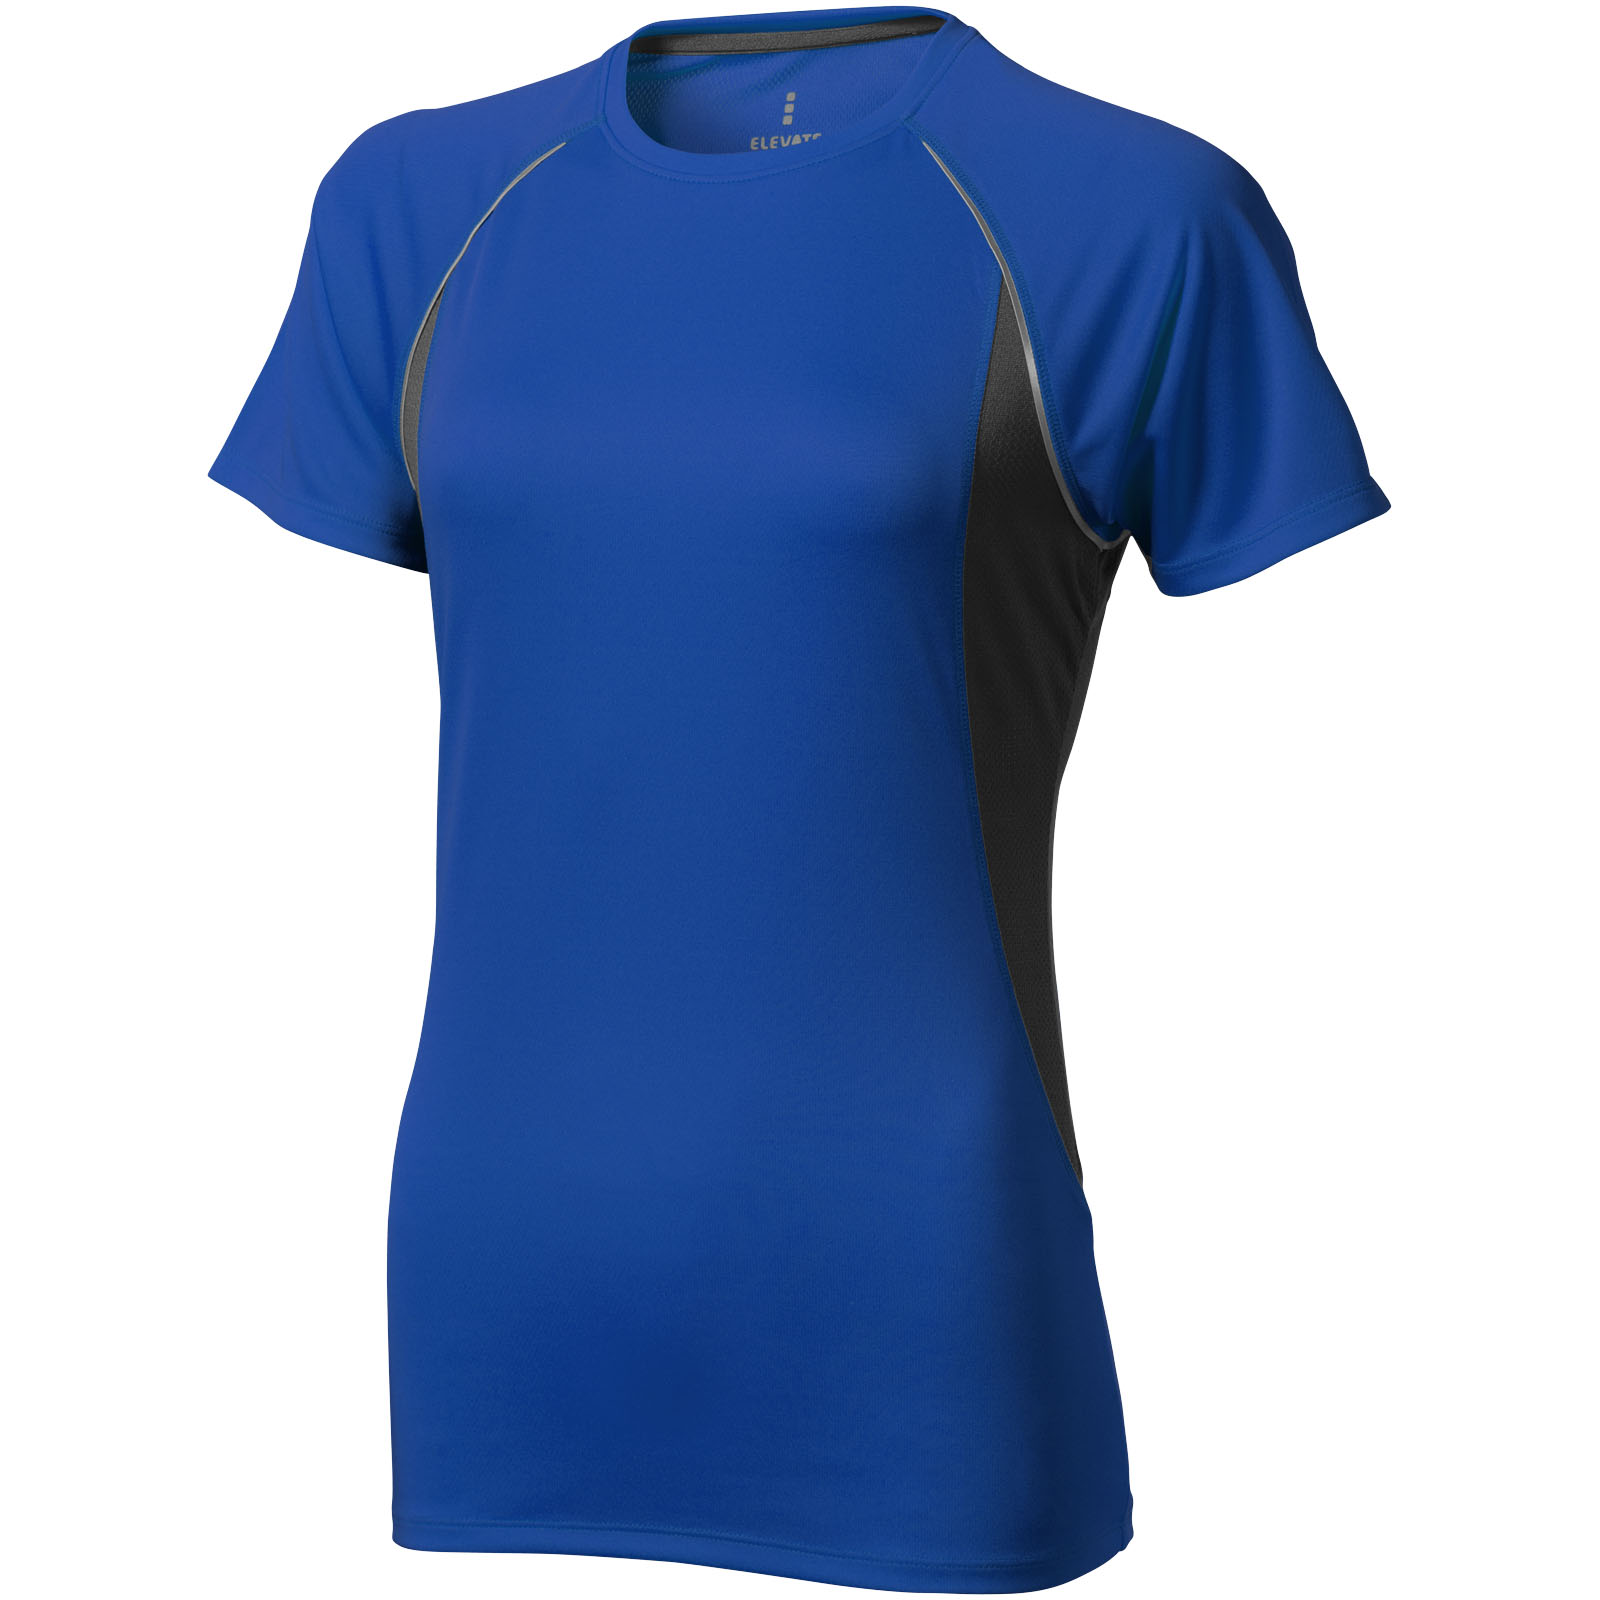 Clothing - Quebec short sleeve women's cool fit t-shirt